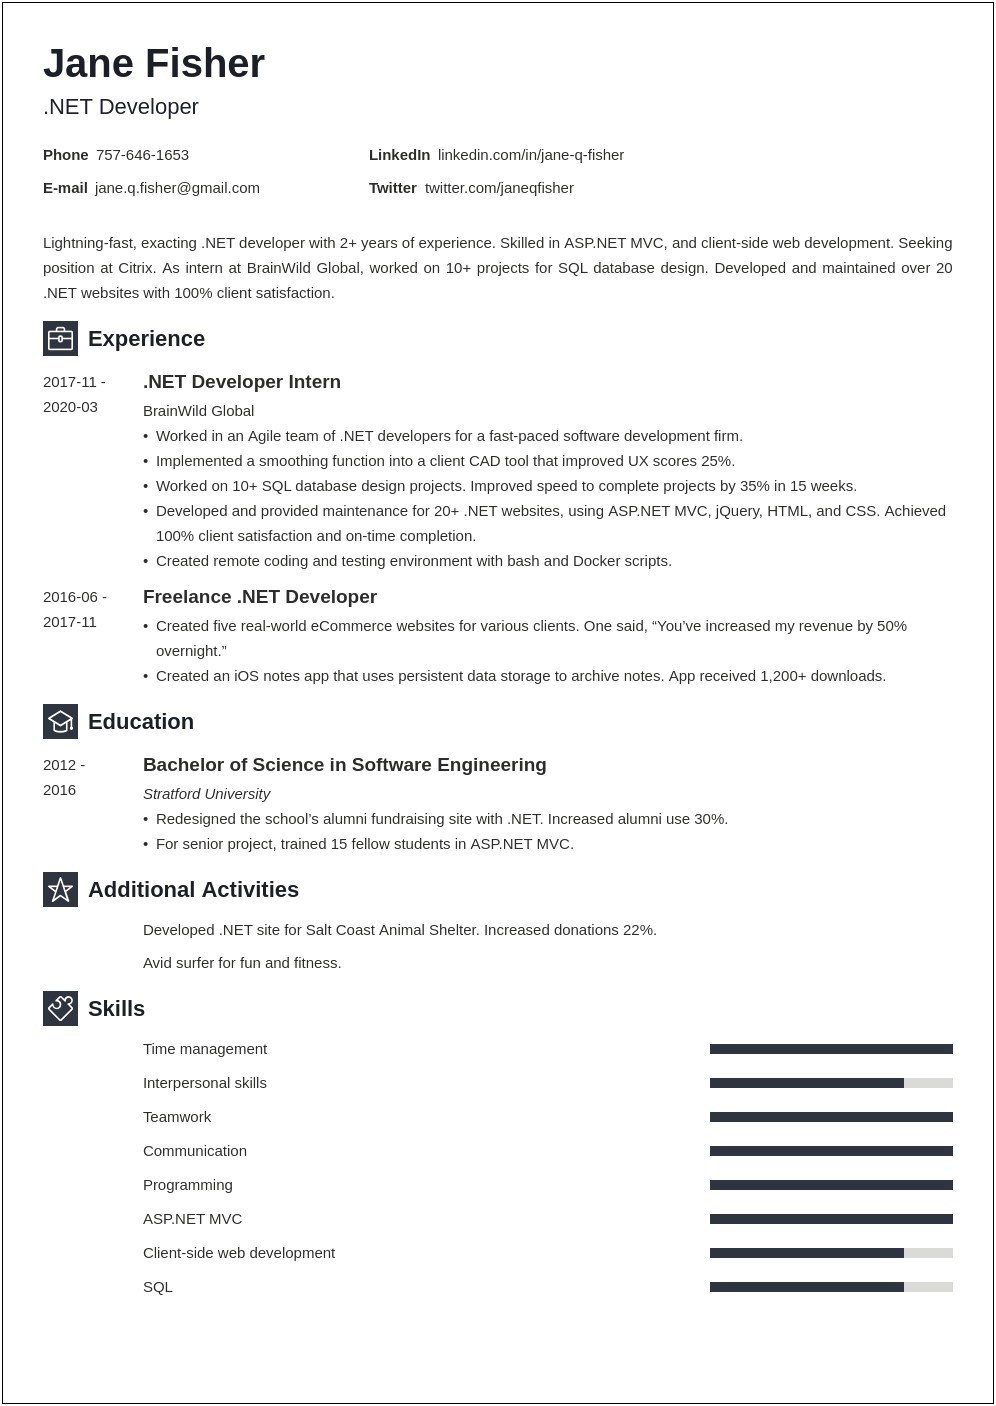 Dot Net Developer Resume With 5 Years Experience